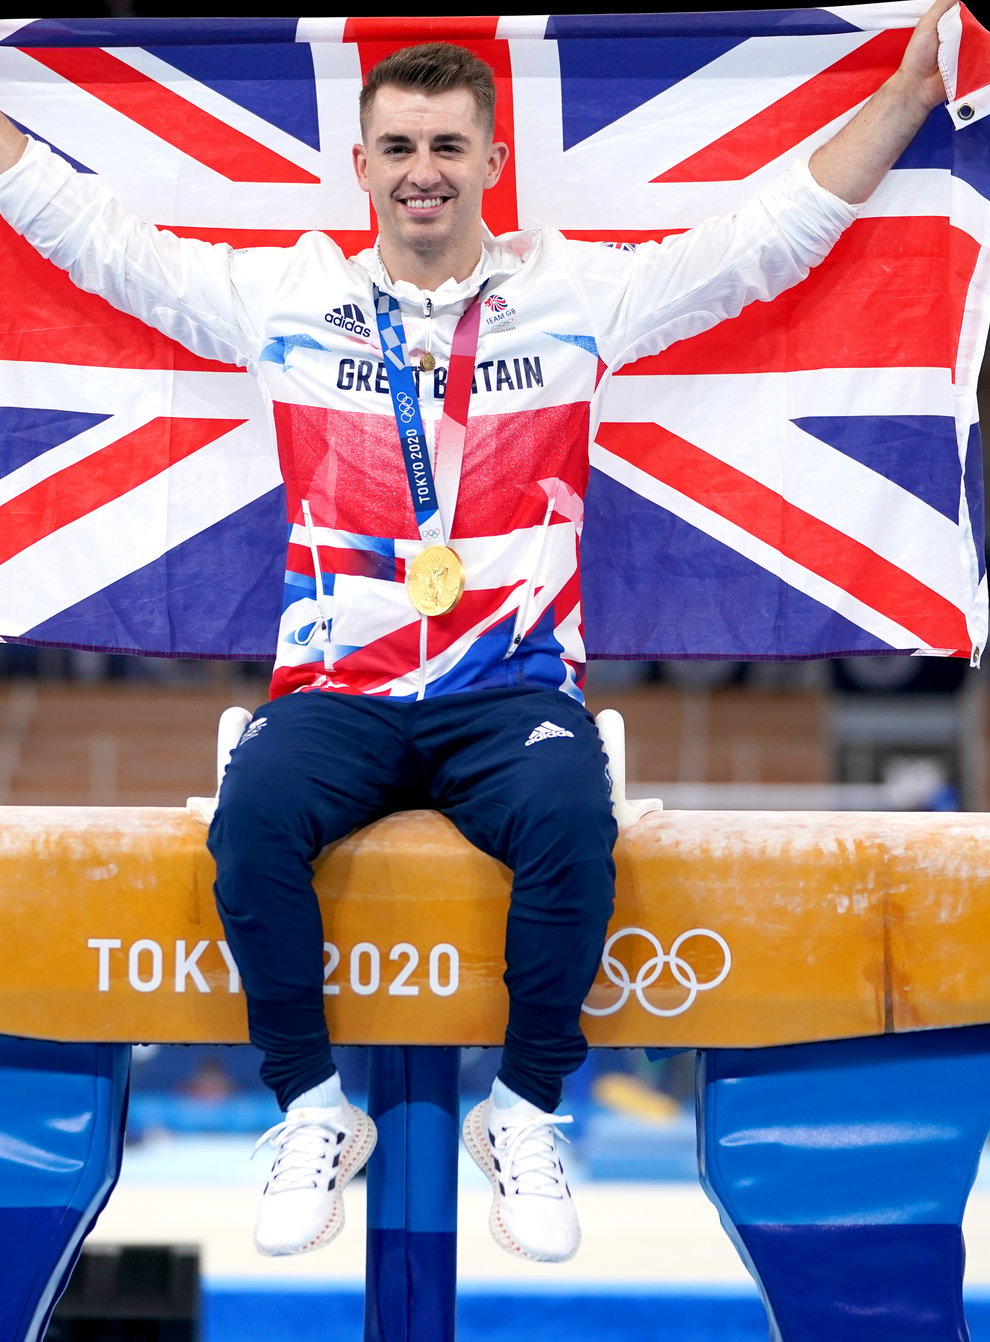 Olympic champion Max Whitlock will miss next month’s World Gymnastics Championships in Liverpool (Mike Egerton/PA)